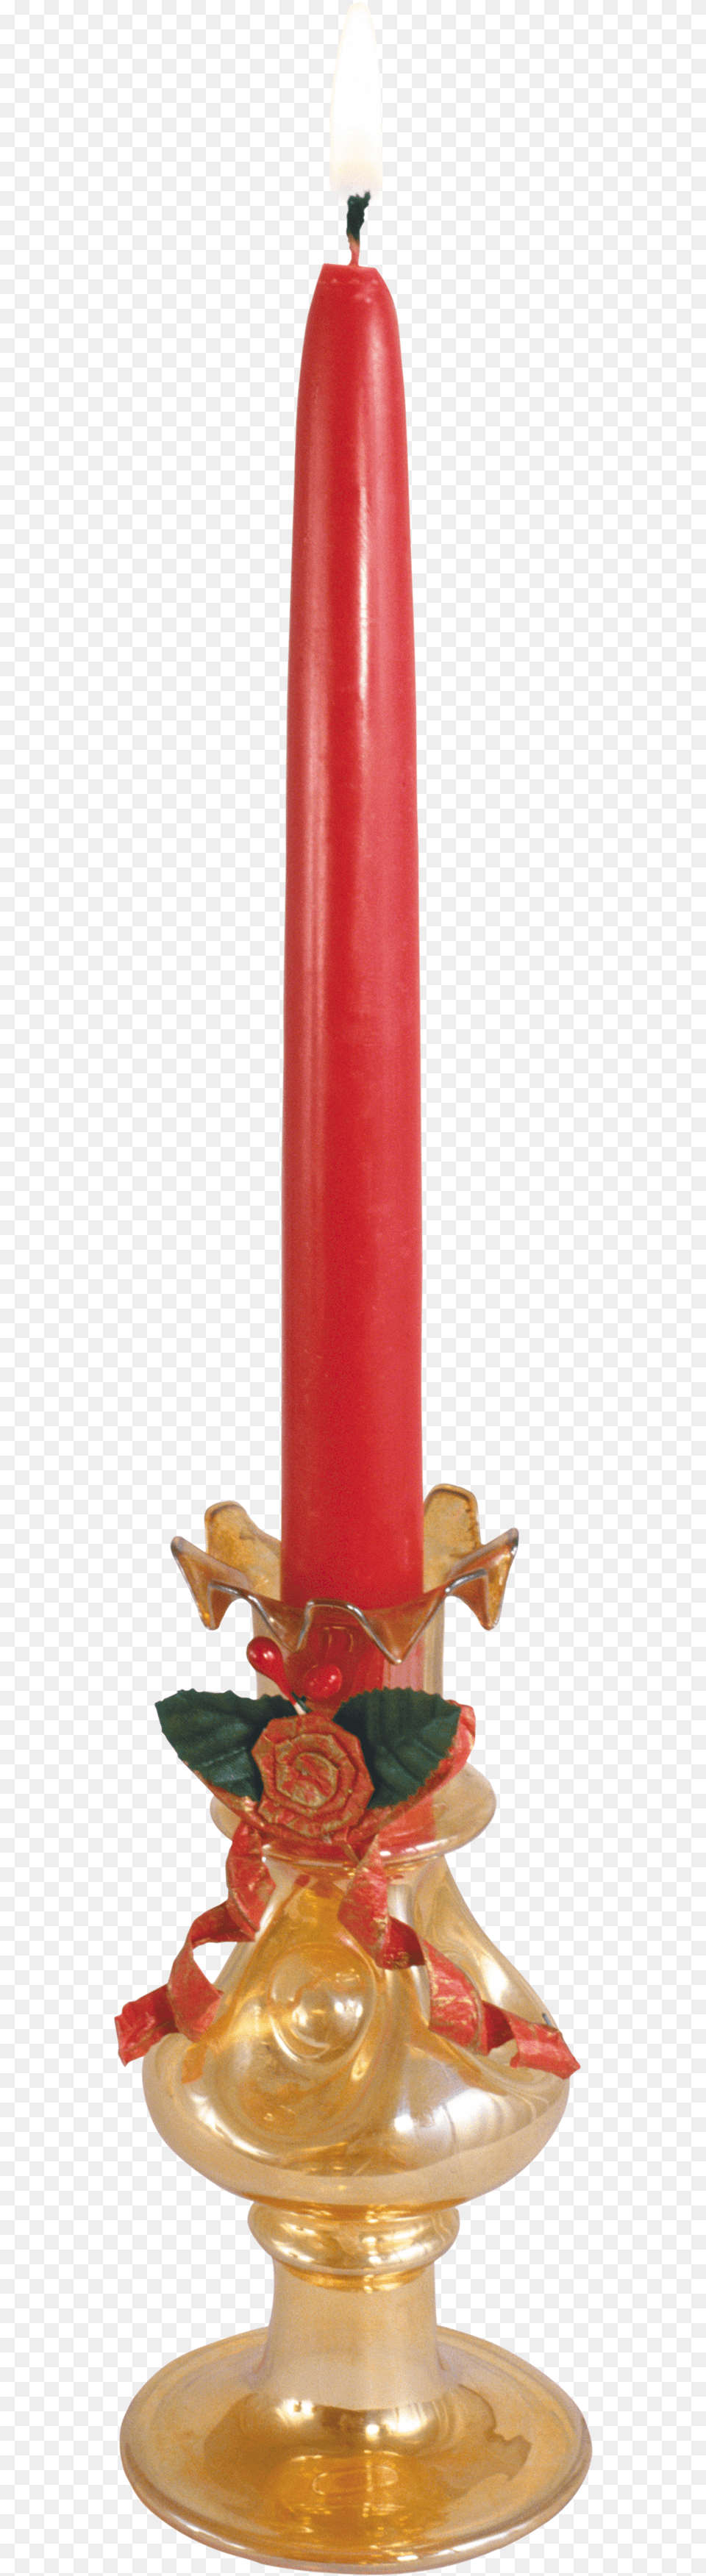 Candle, Candlestick Png